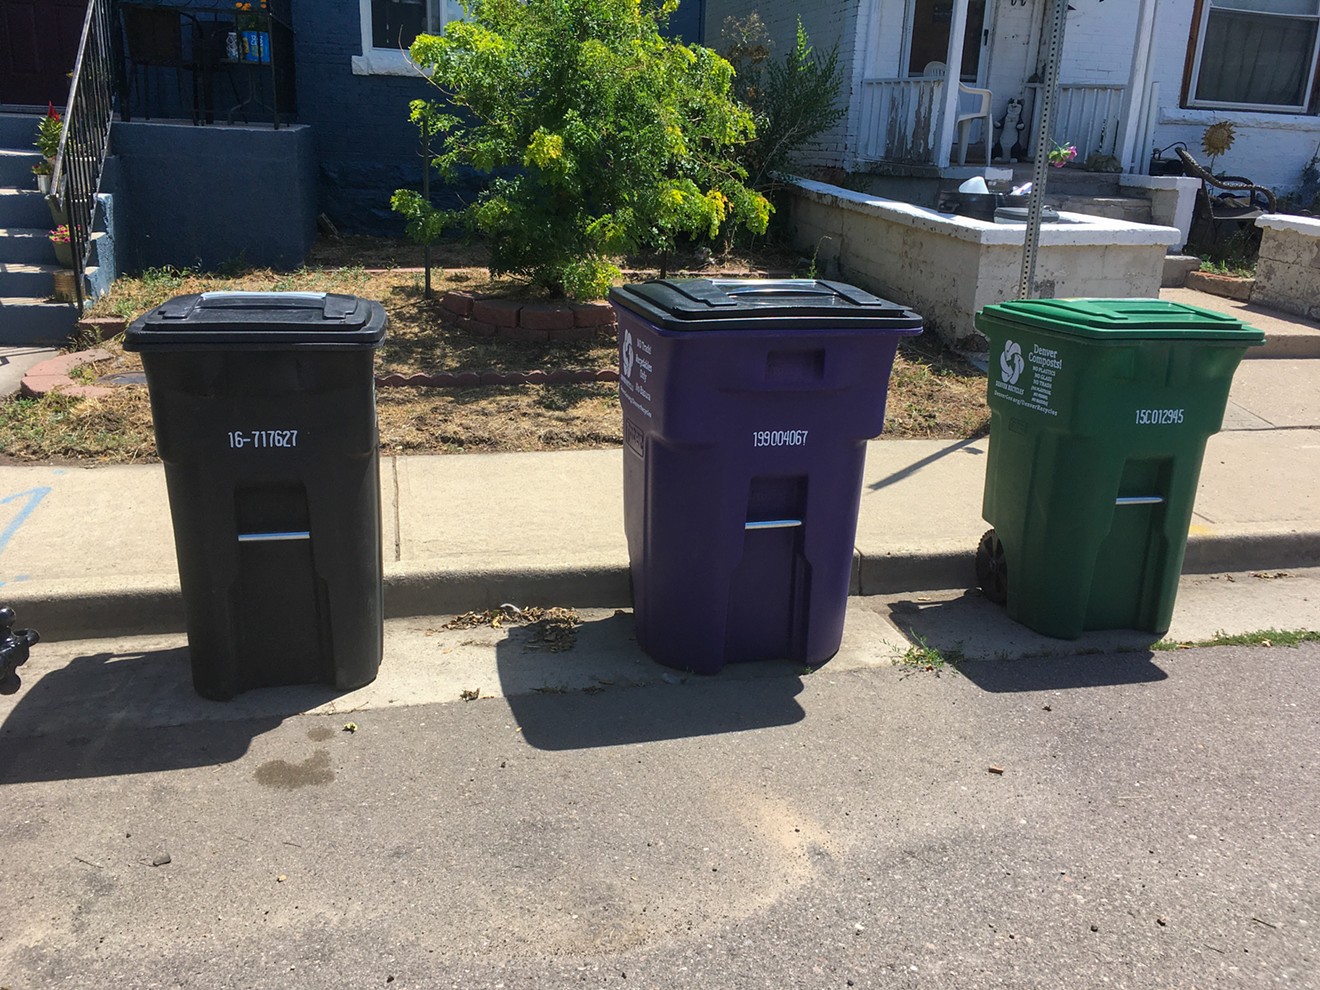 Denver residents will soon all have trash, recycling and composting as an option.